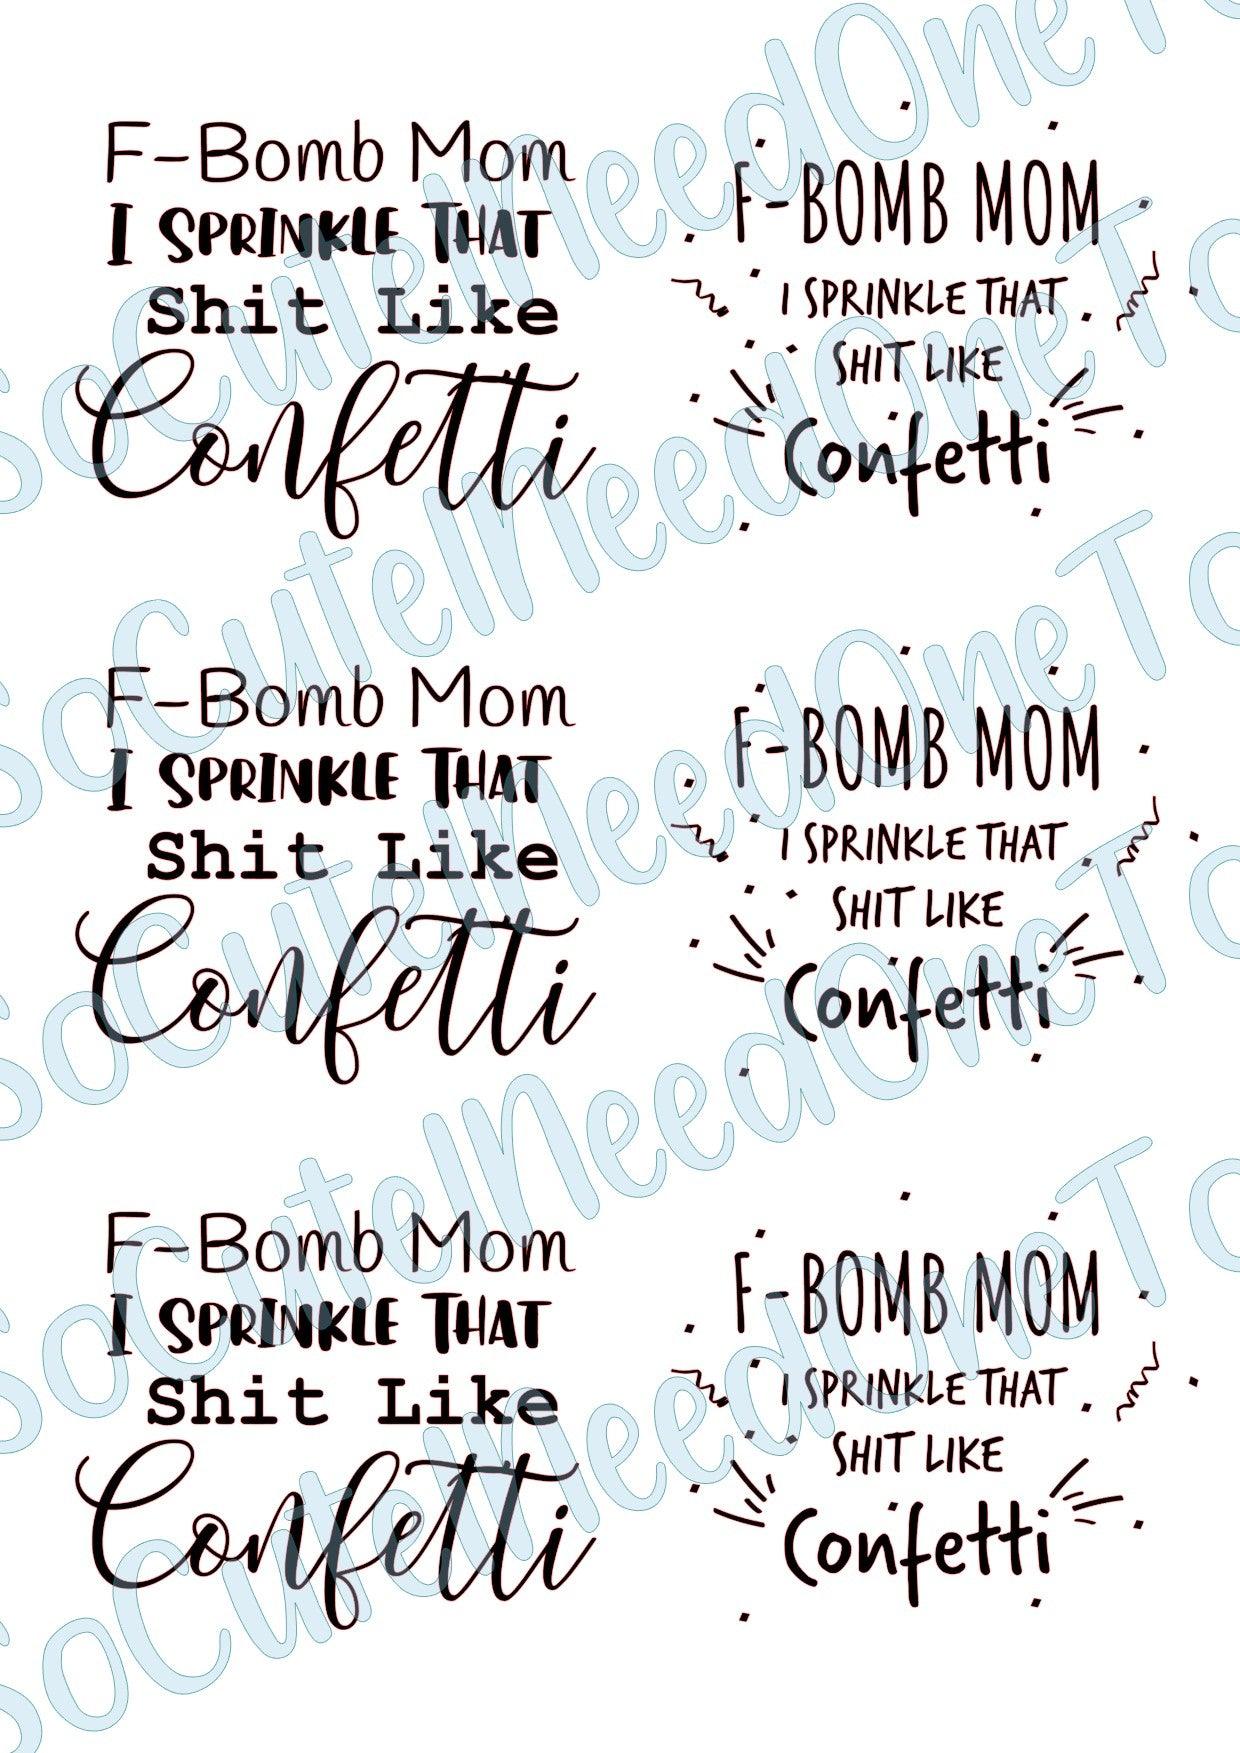 F - BOMB MOM on Clear/White Waterslide Paper Ready To Use - SoCuteINeedOneToo